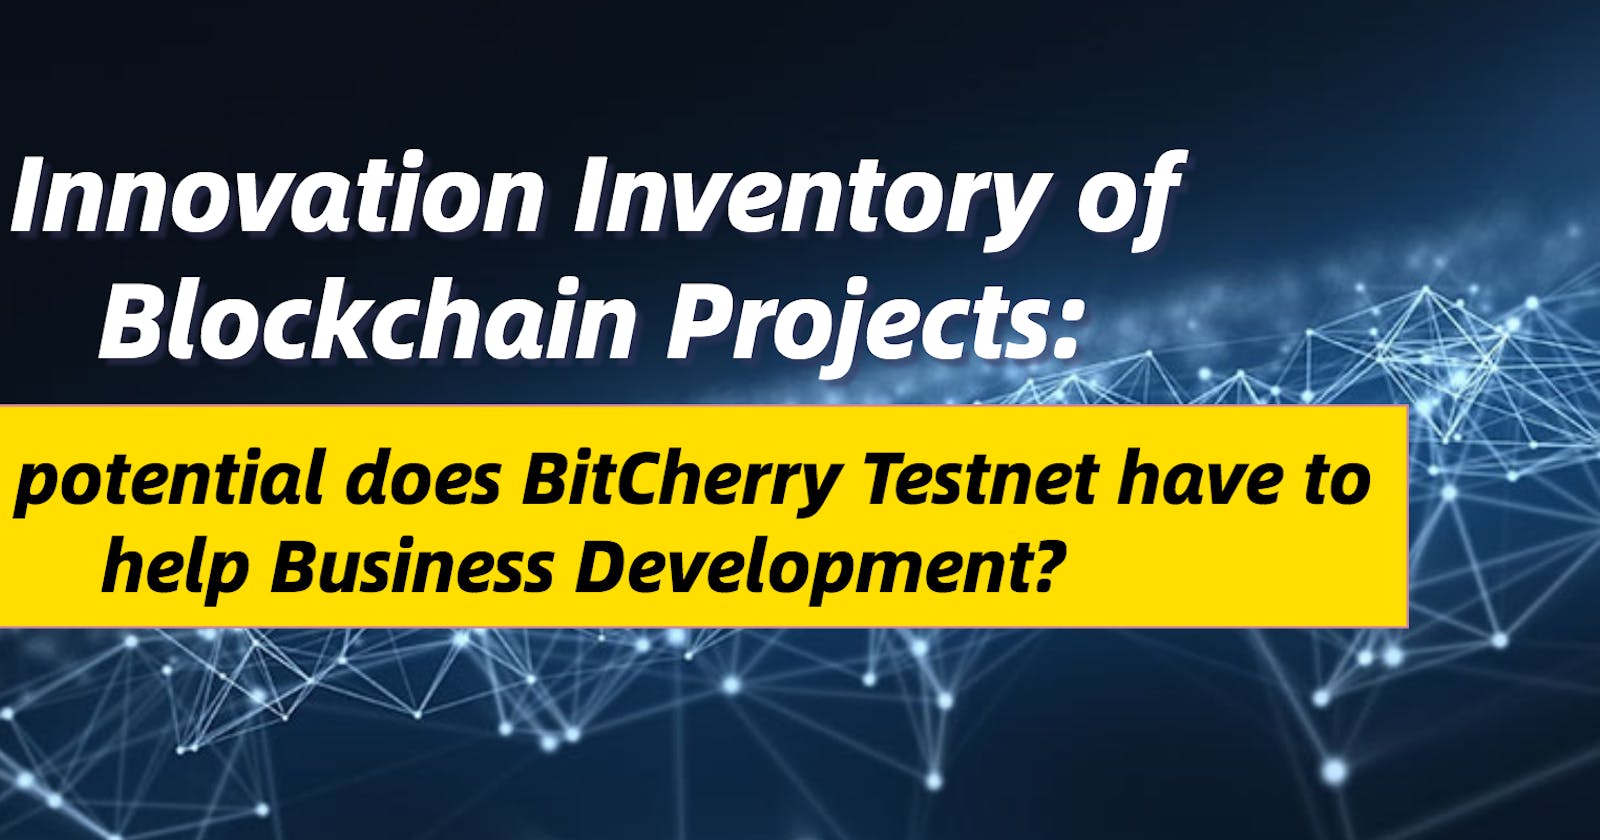 Innovation Inventory of Blockchain Projects: What potential does BitCherry Testnet have to help Business Development?